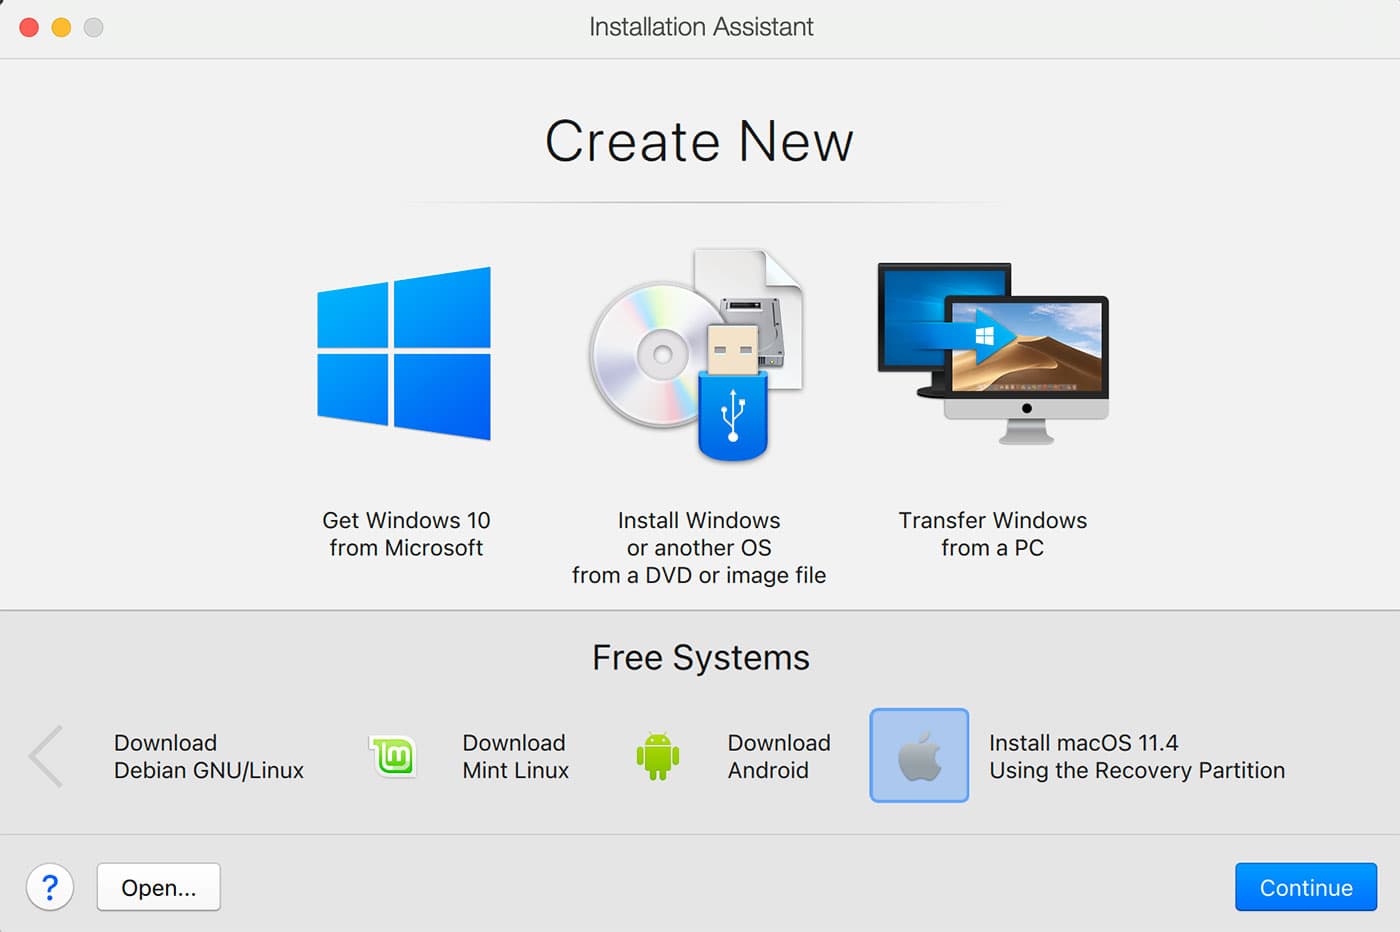 Parallels Desktop Free Systems